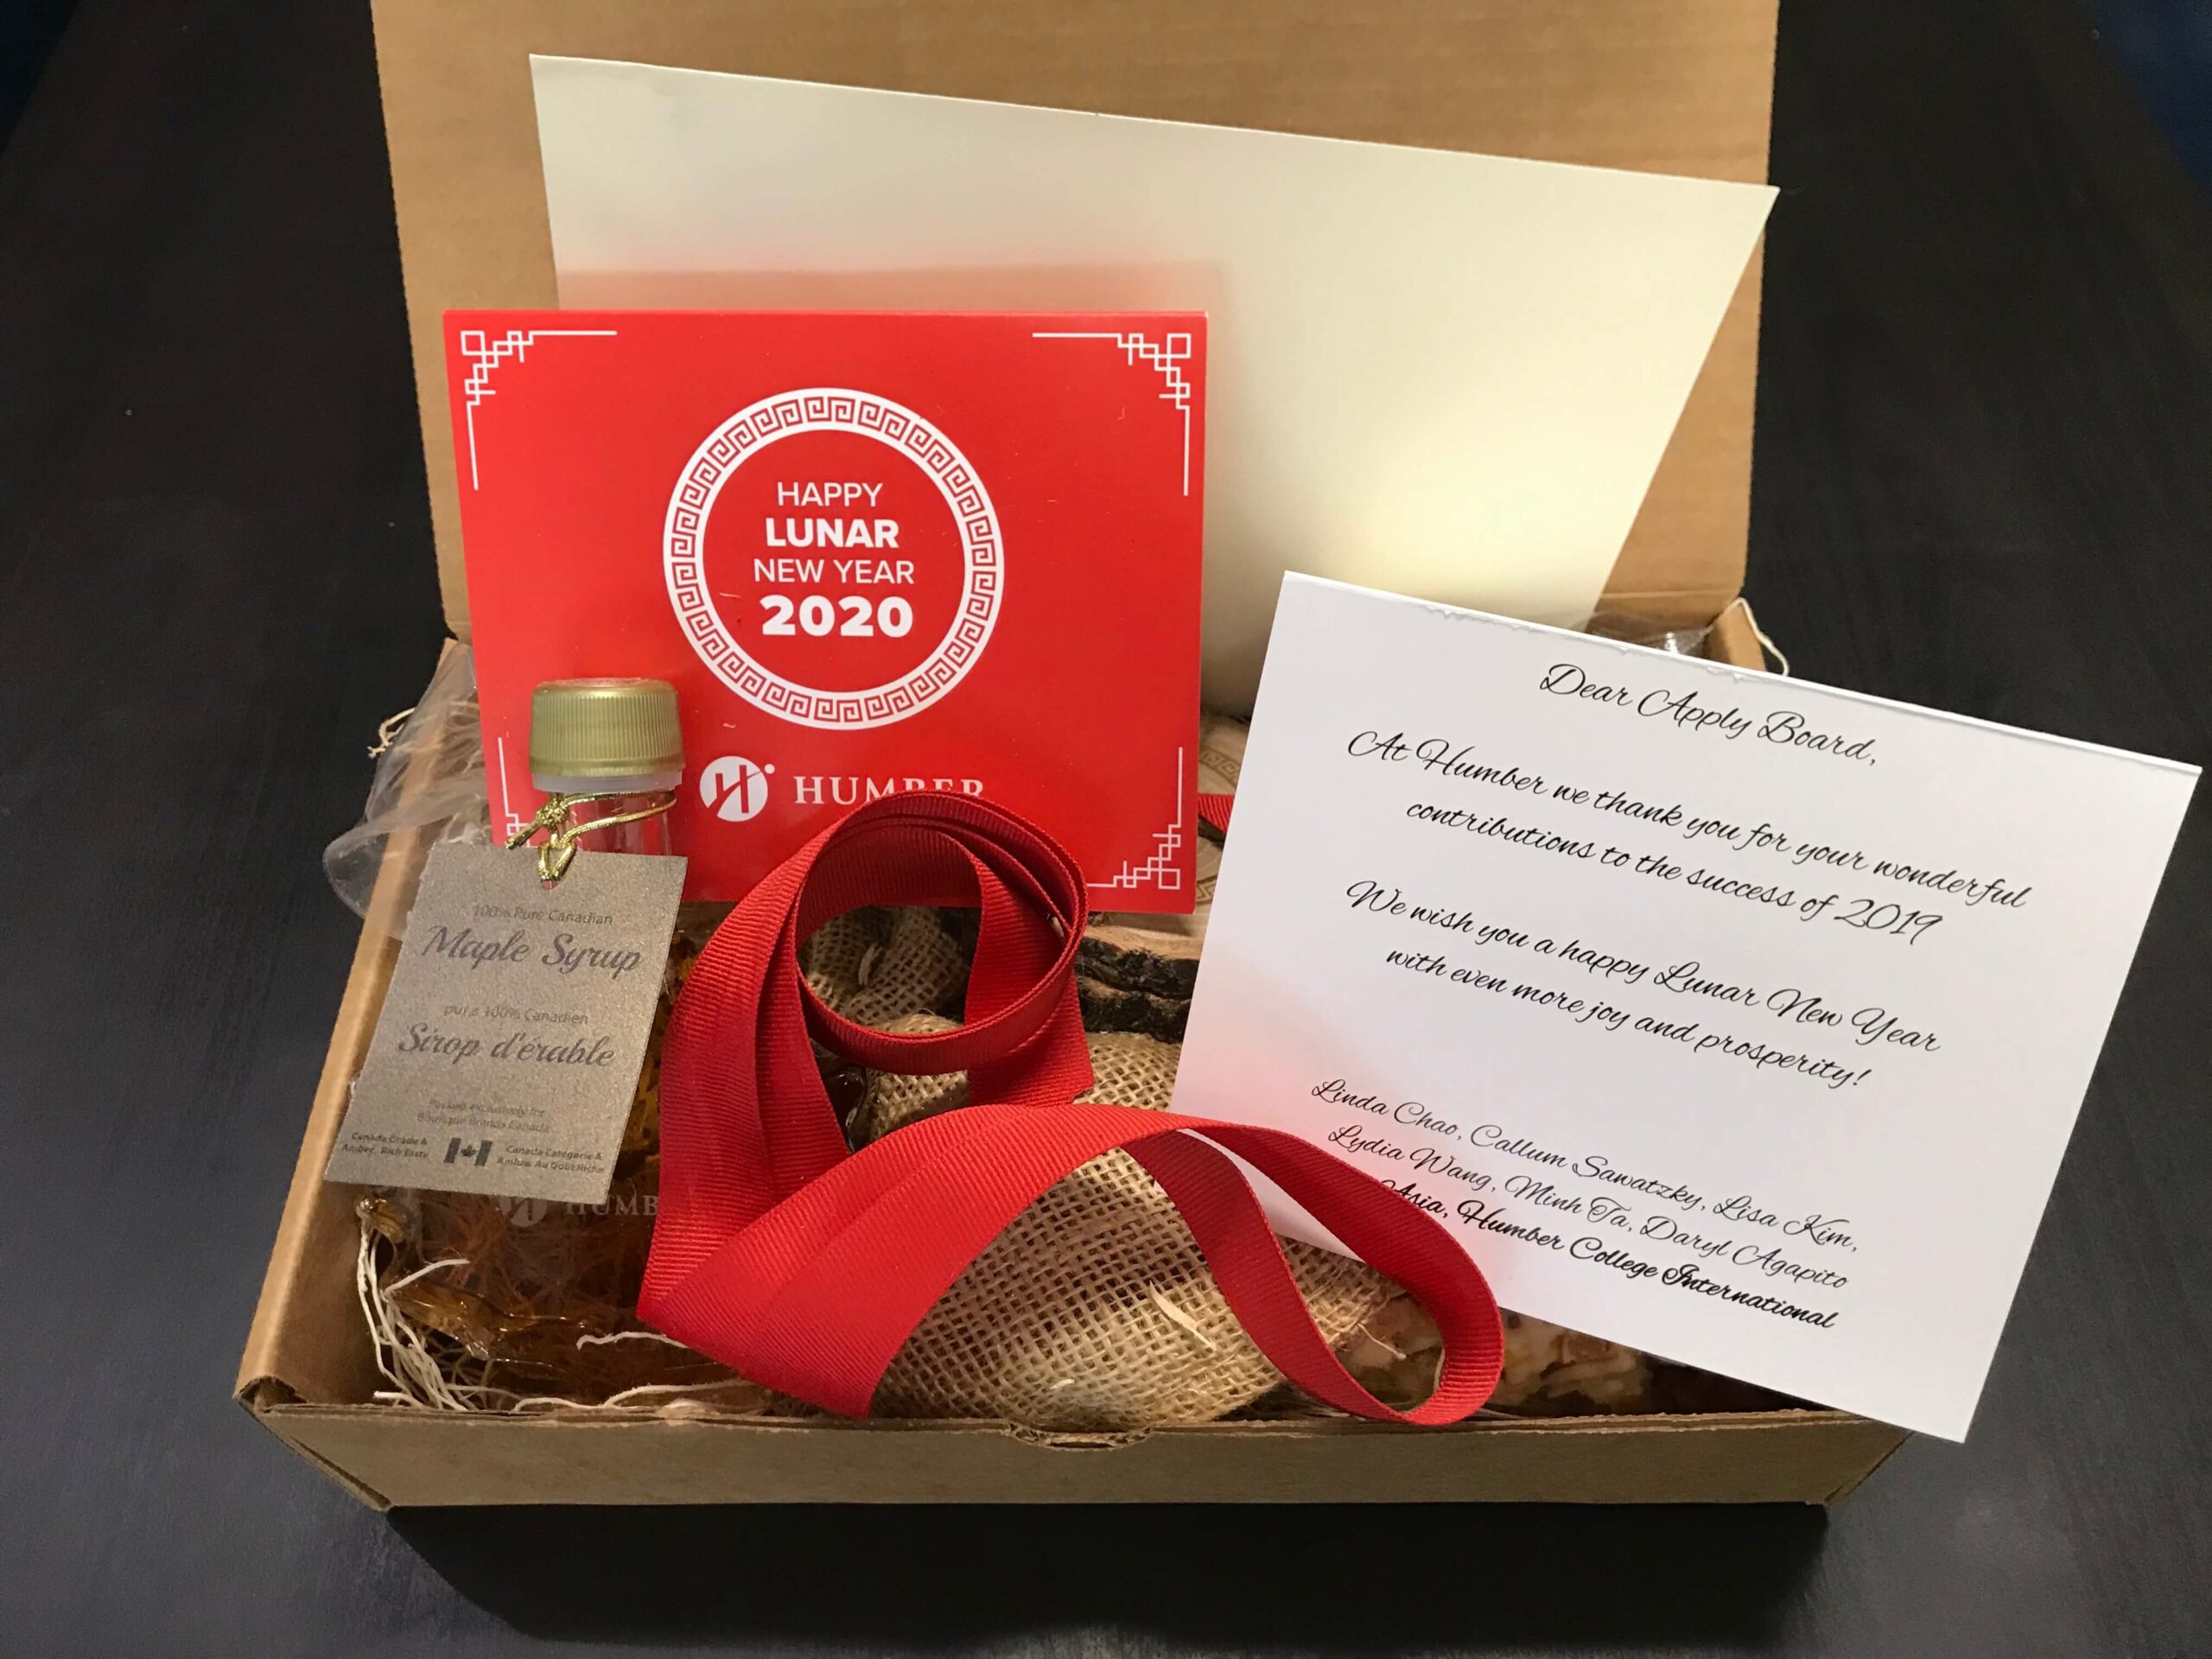 ApplyBoard's Lunar New Year gift from Humber College